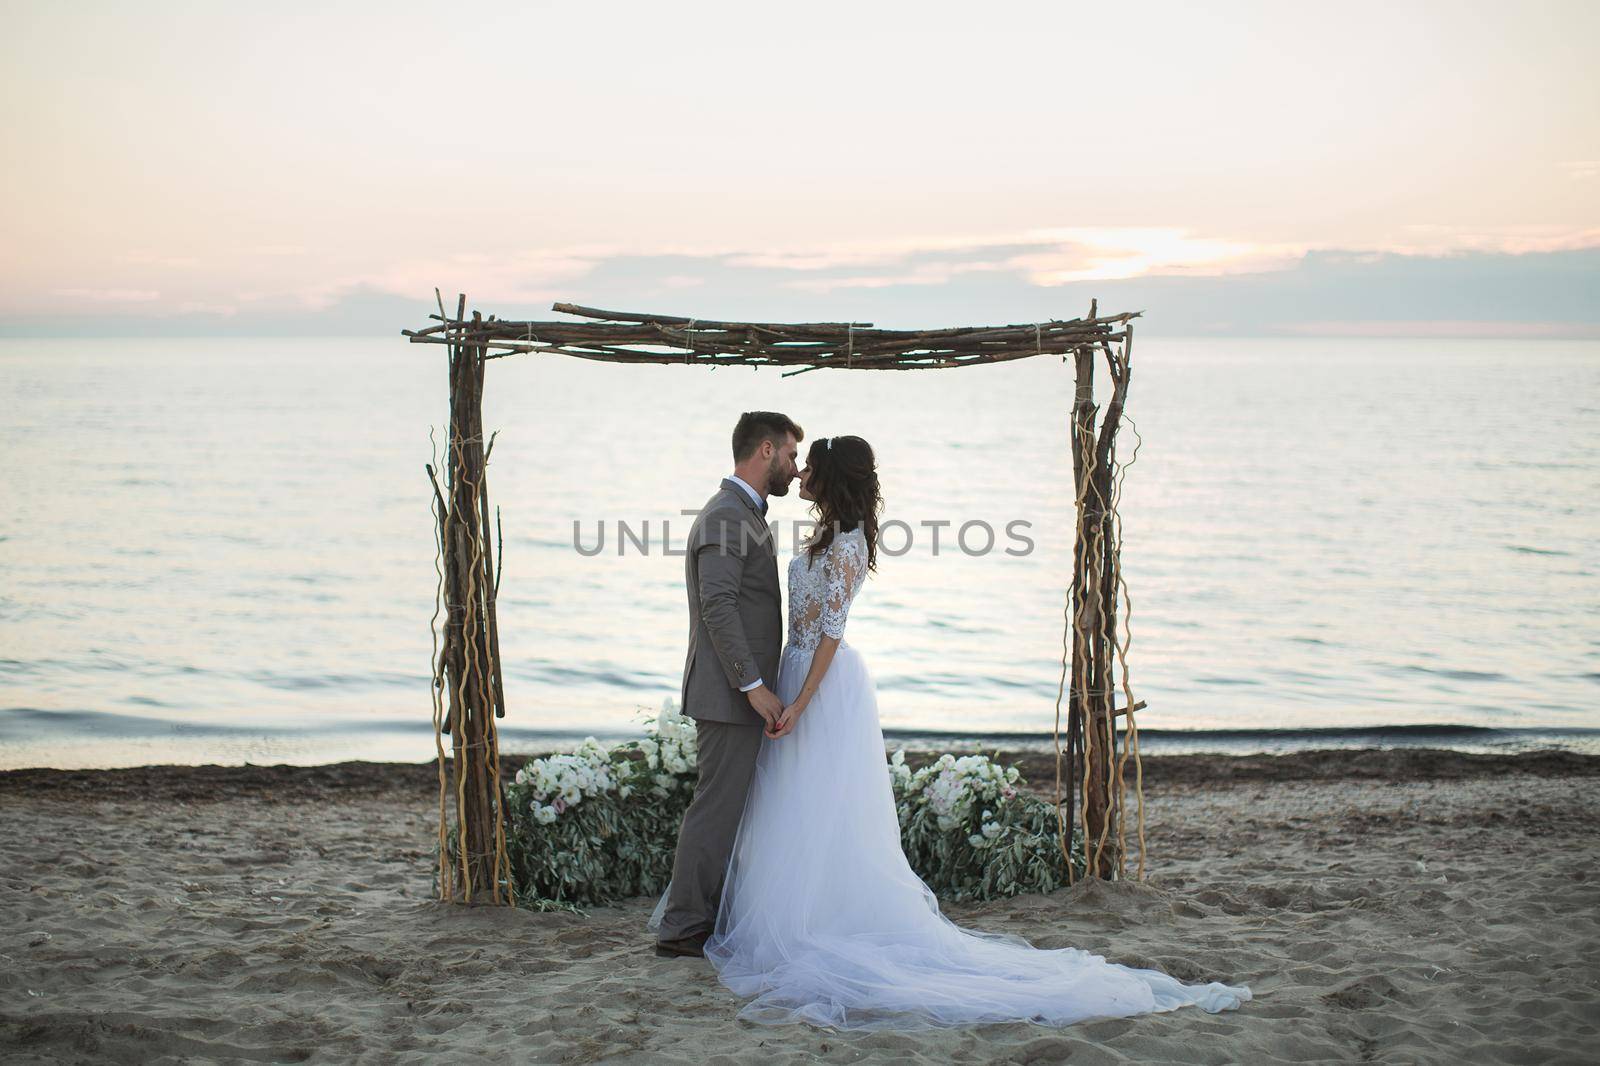 The bride and groom under archway on beach. Sunset, twilight.